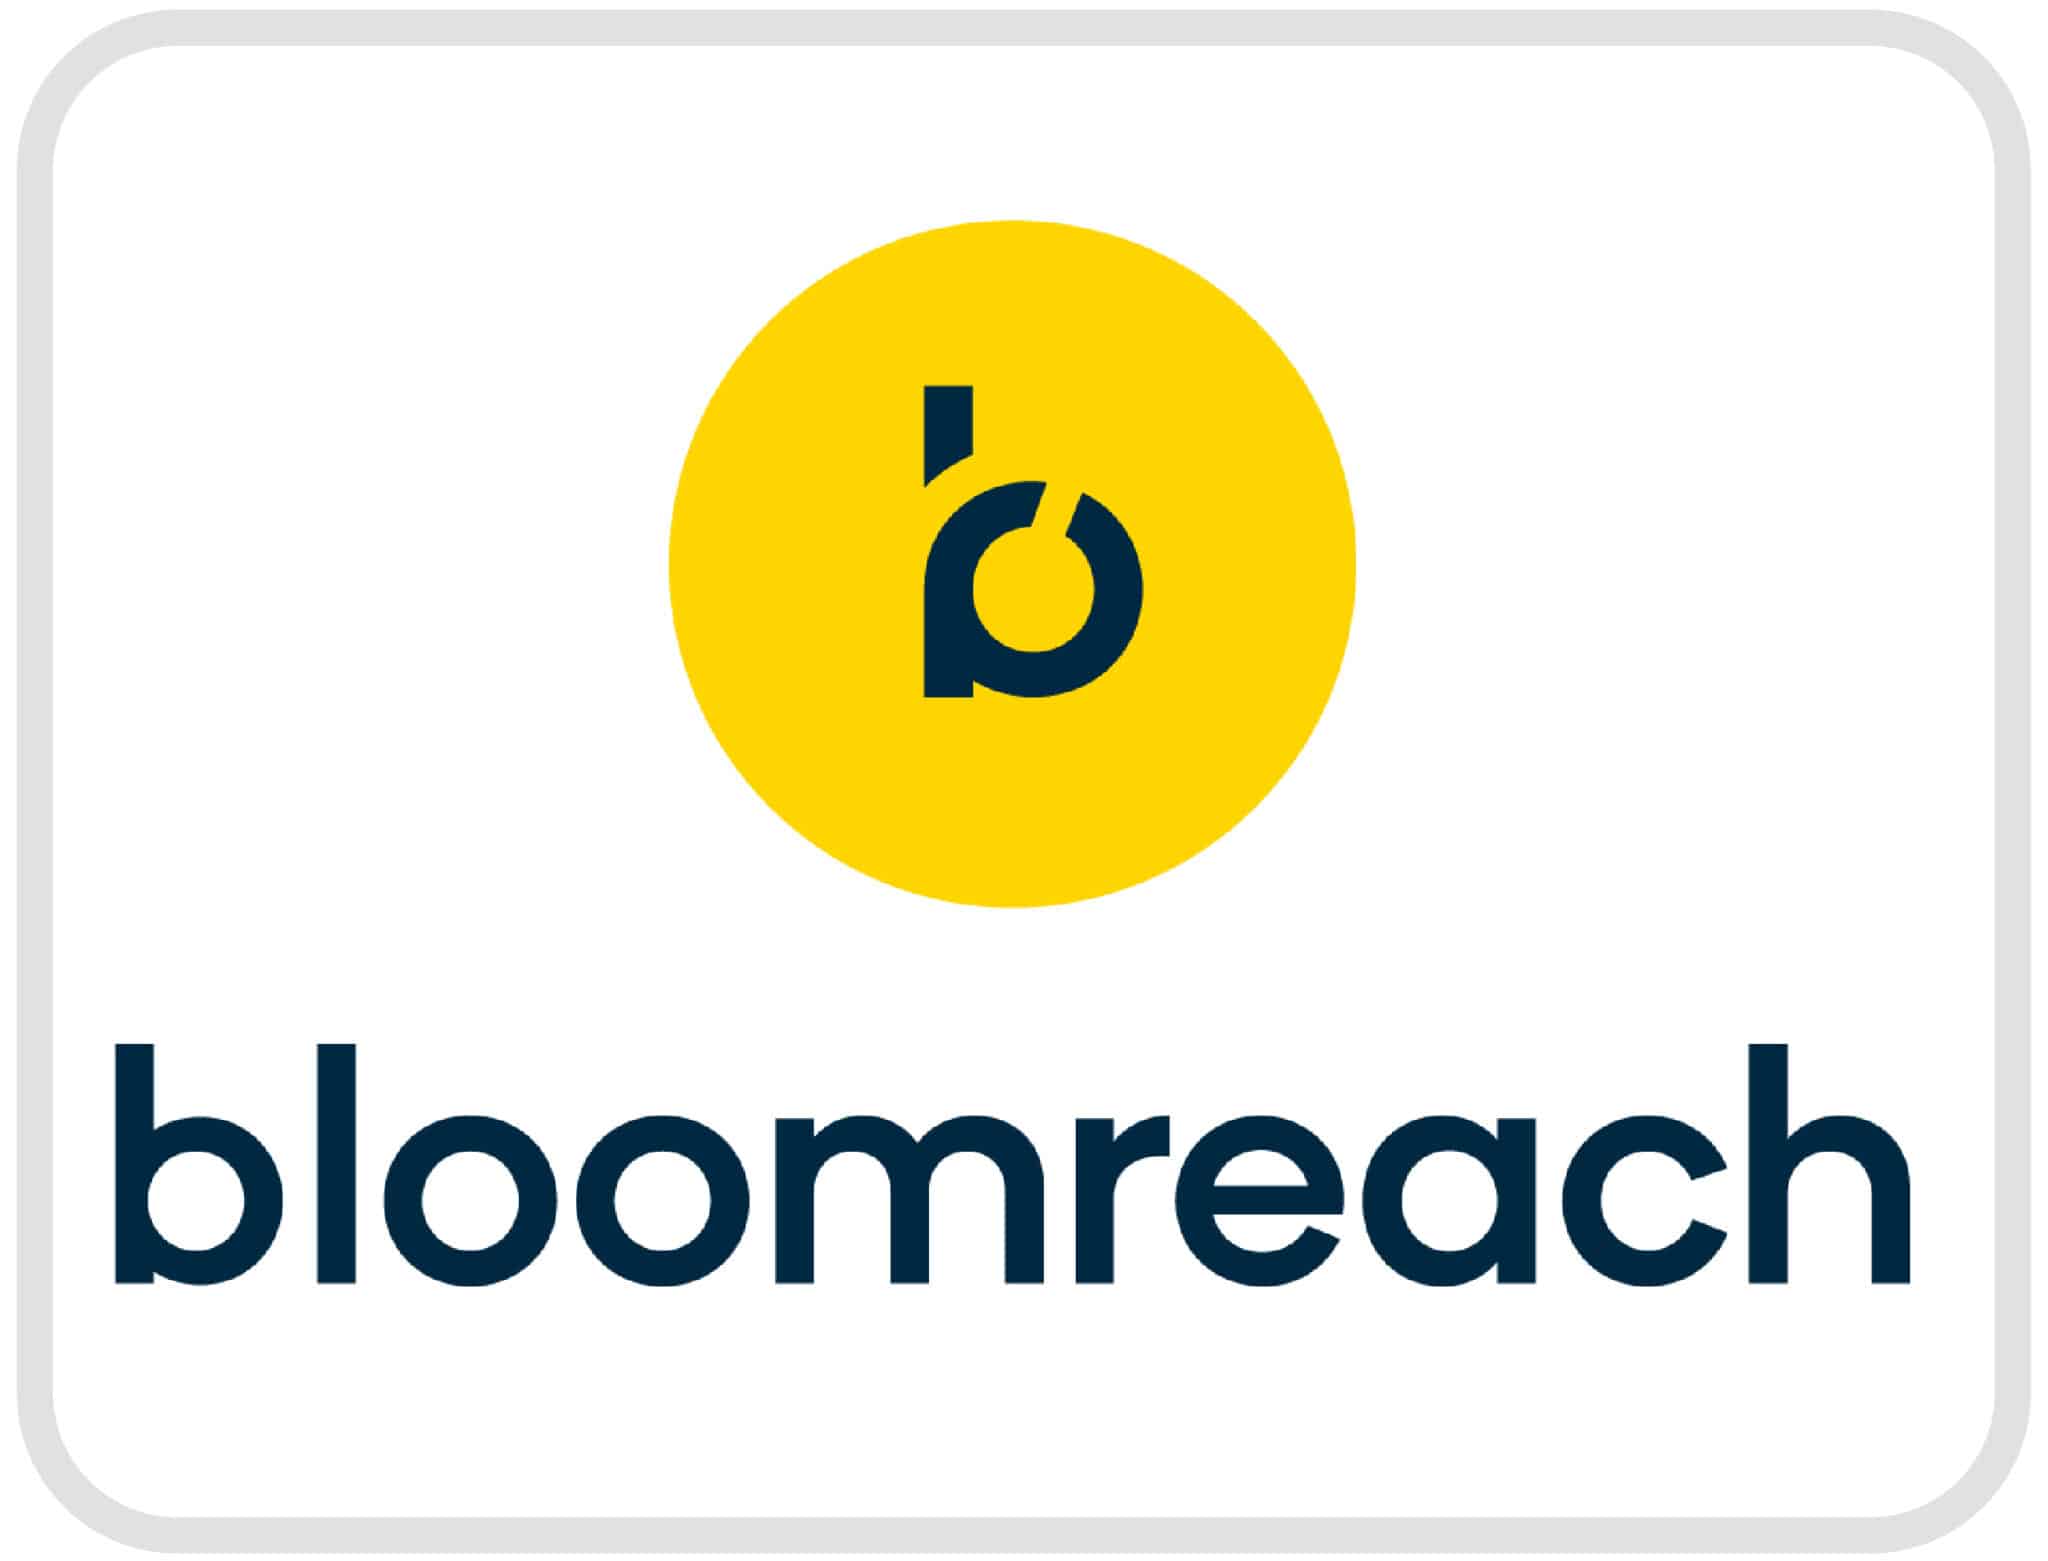 This is the bloomreach logo